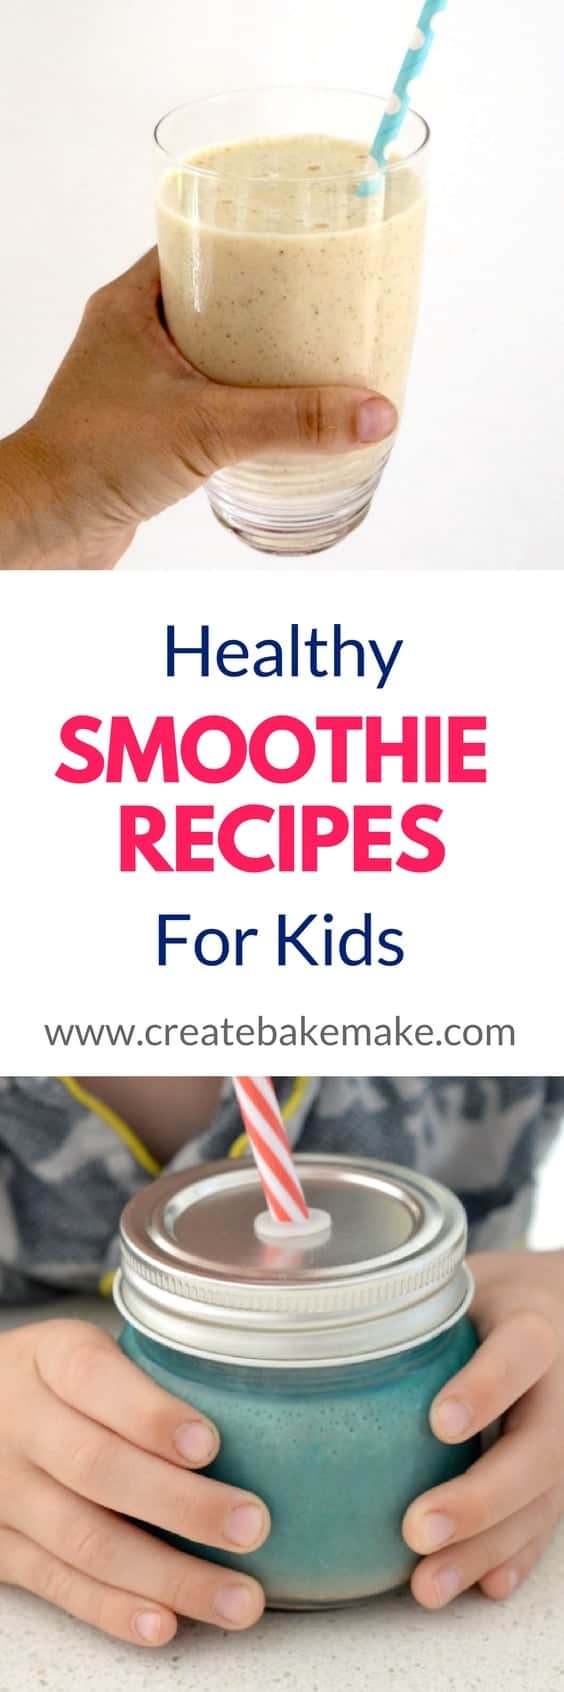 Healthy Smoothie Recipes for Kids